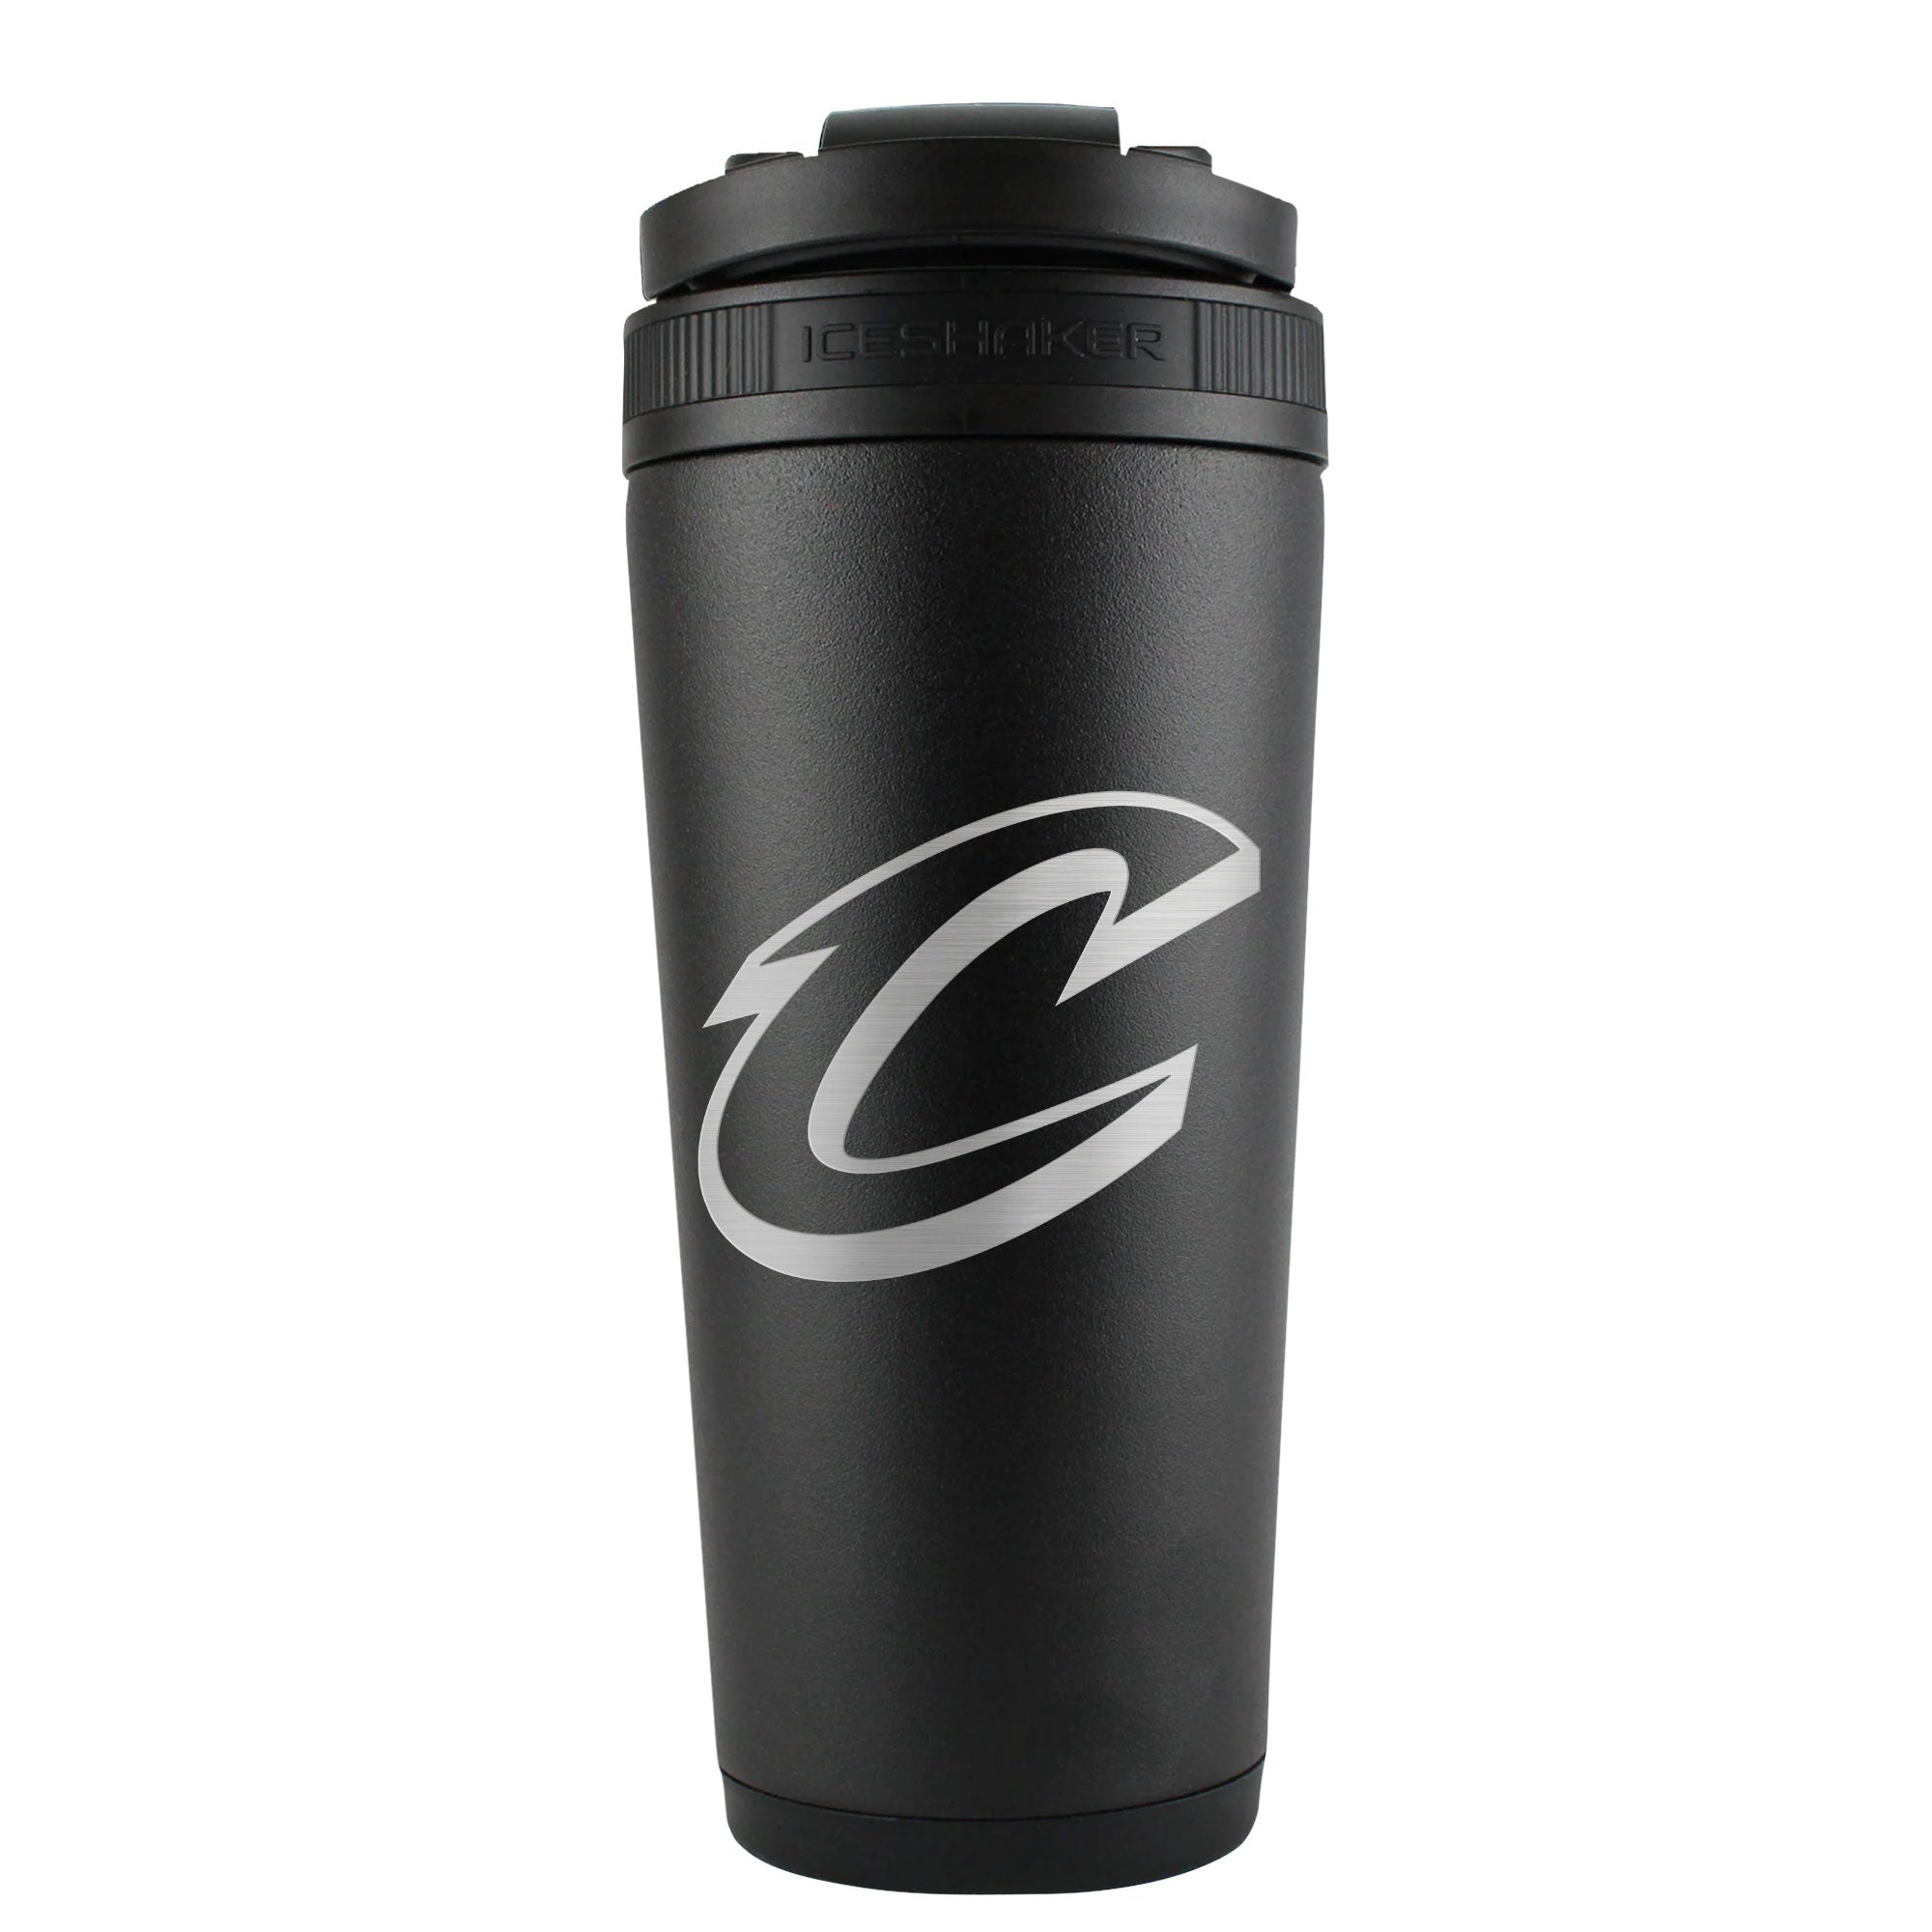 Officially Licensed Cleveland Cavaliers 26oz Ice Shaker - Black